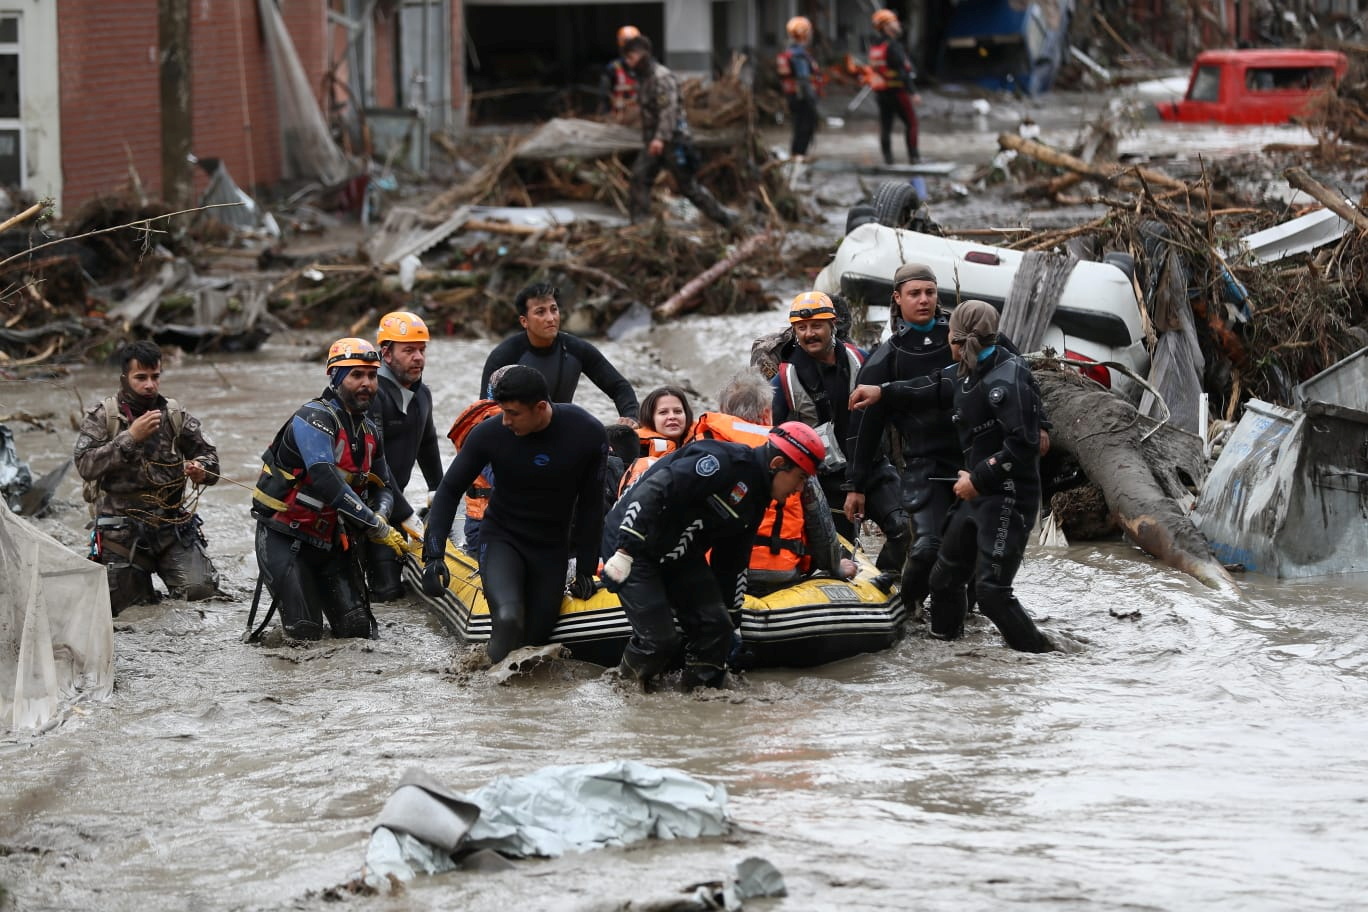 Спасатели эвакуируют людей из зоны бедствия. Фото  e team members evacuate locals during flash floods which have swept through towns in the Turkish Black Sea region, in Bozkurt, a town in Kastamonu province, Turkey, August 12, 2021. Picture taken August 12, 2021. Onder Godez/Ministry of Interior Disaster and Emergency Management Authority (AFAD) Press Office/Handout via REUTERS/Scanpix/Leta